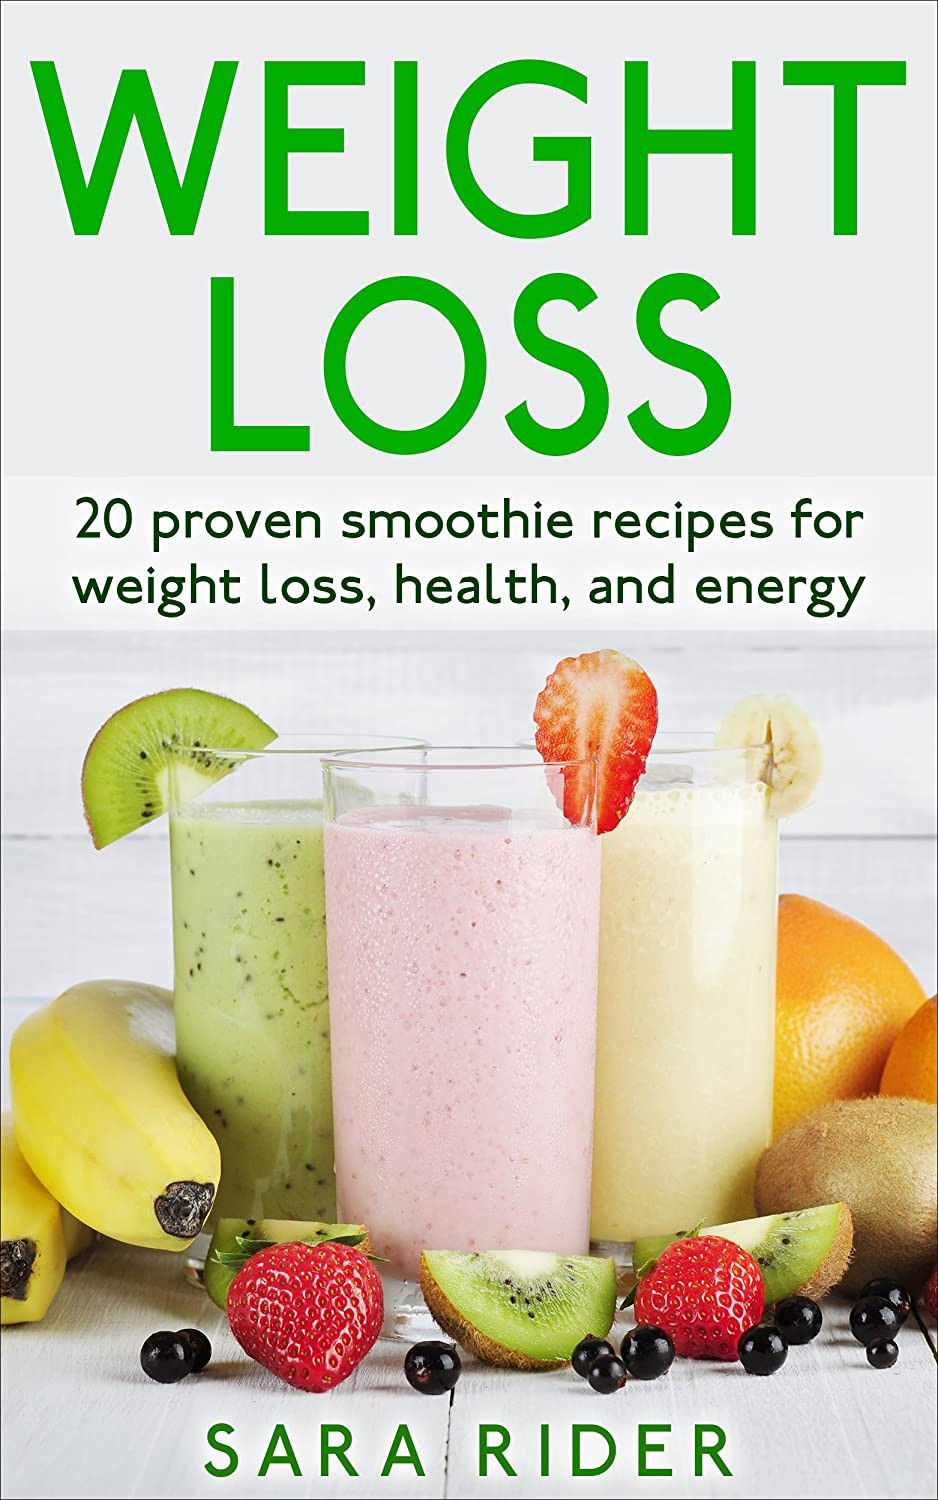 Smoothies Recipes To Lose Weight Fast
 AMAZON KINDLE BOOK PROMOTION Weight Loss 20 Proven